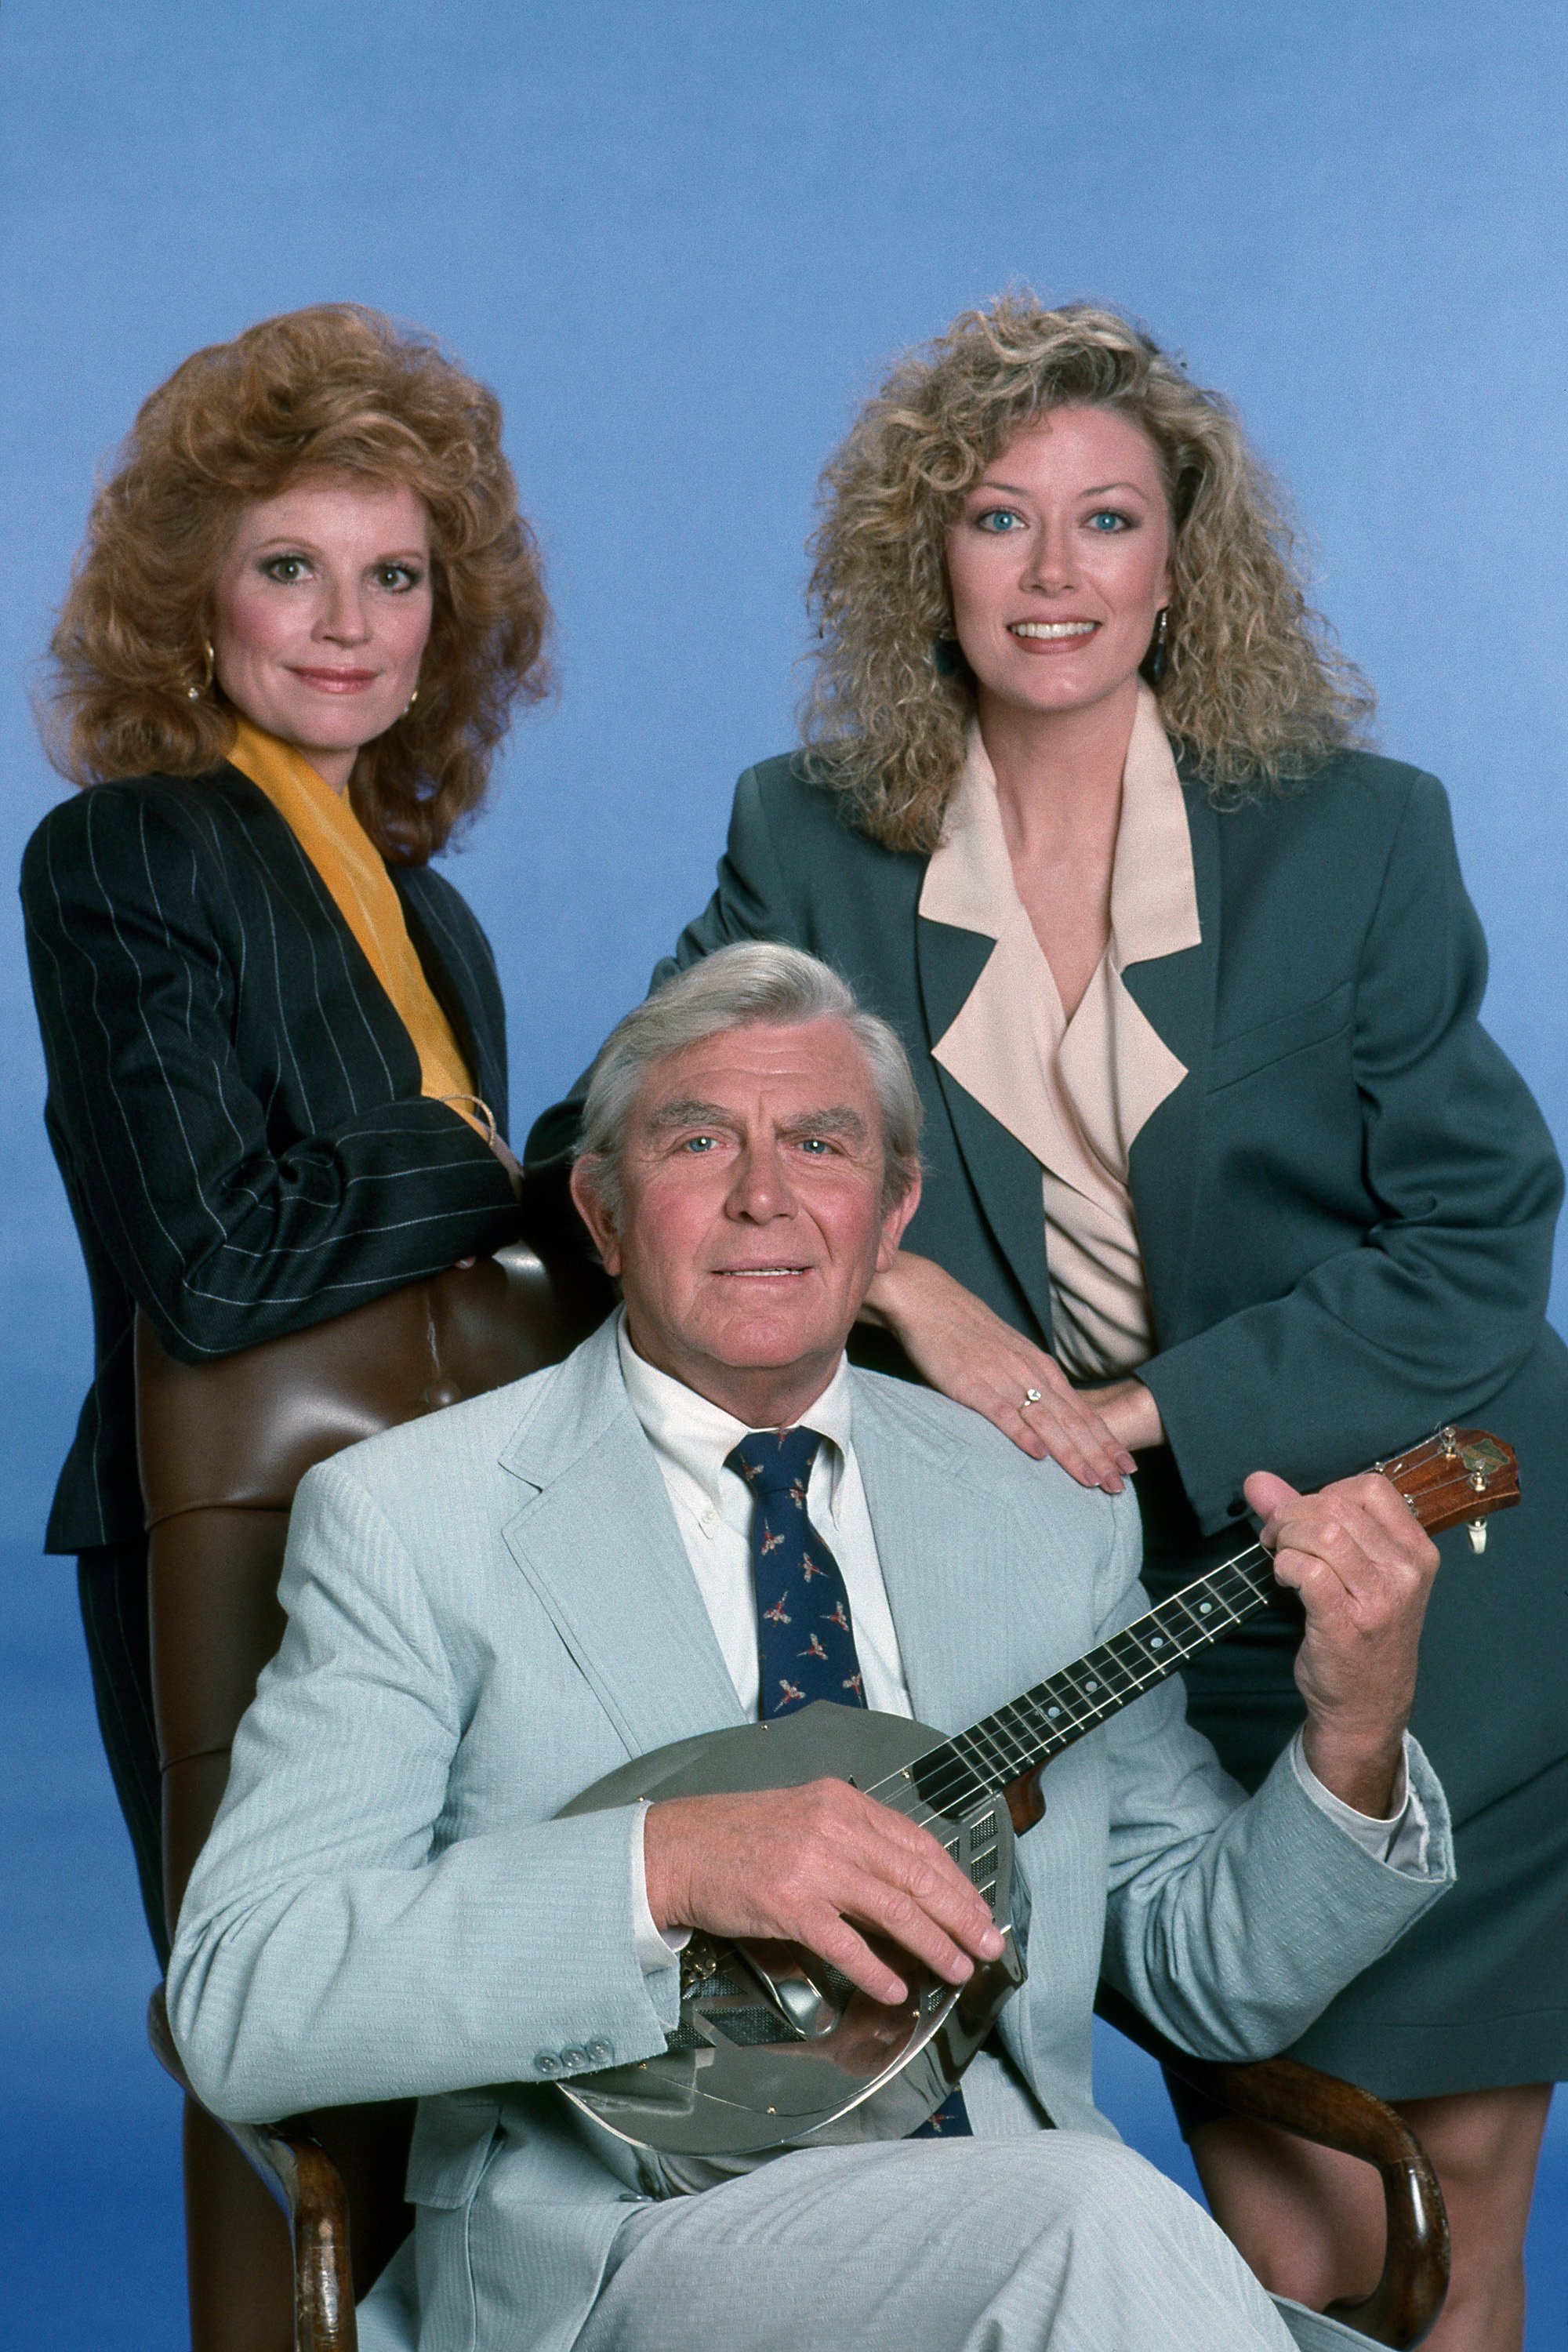 'Matlock' cast photo featuring Julie Sommars as A.D.A. Julie March, Andy Griffith as Ben Matlock, and Nancy Stafford as Atty. Michelle Thomas